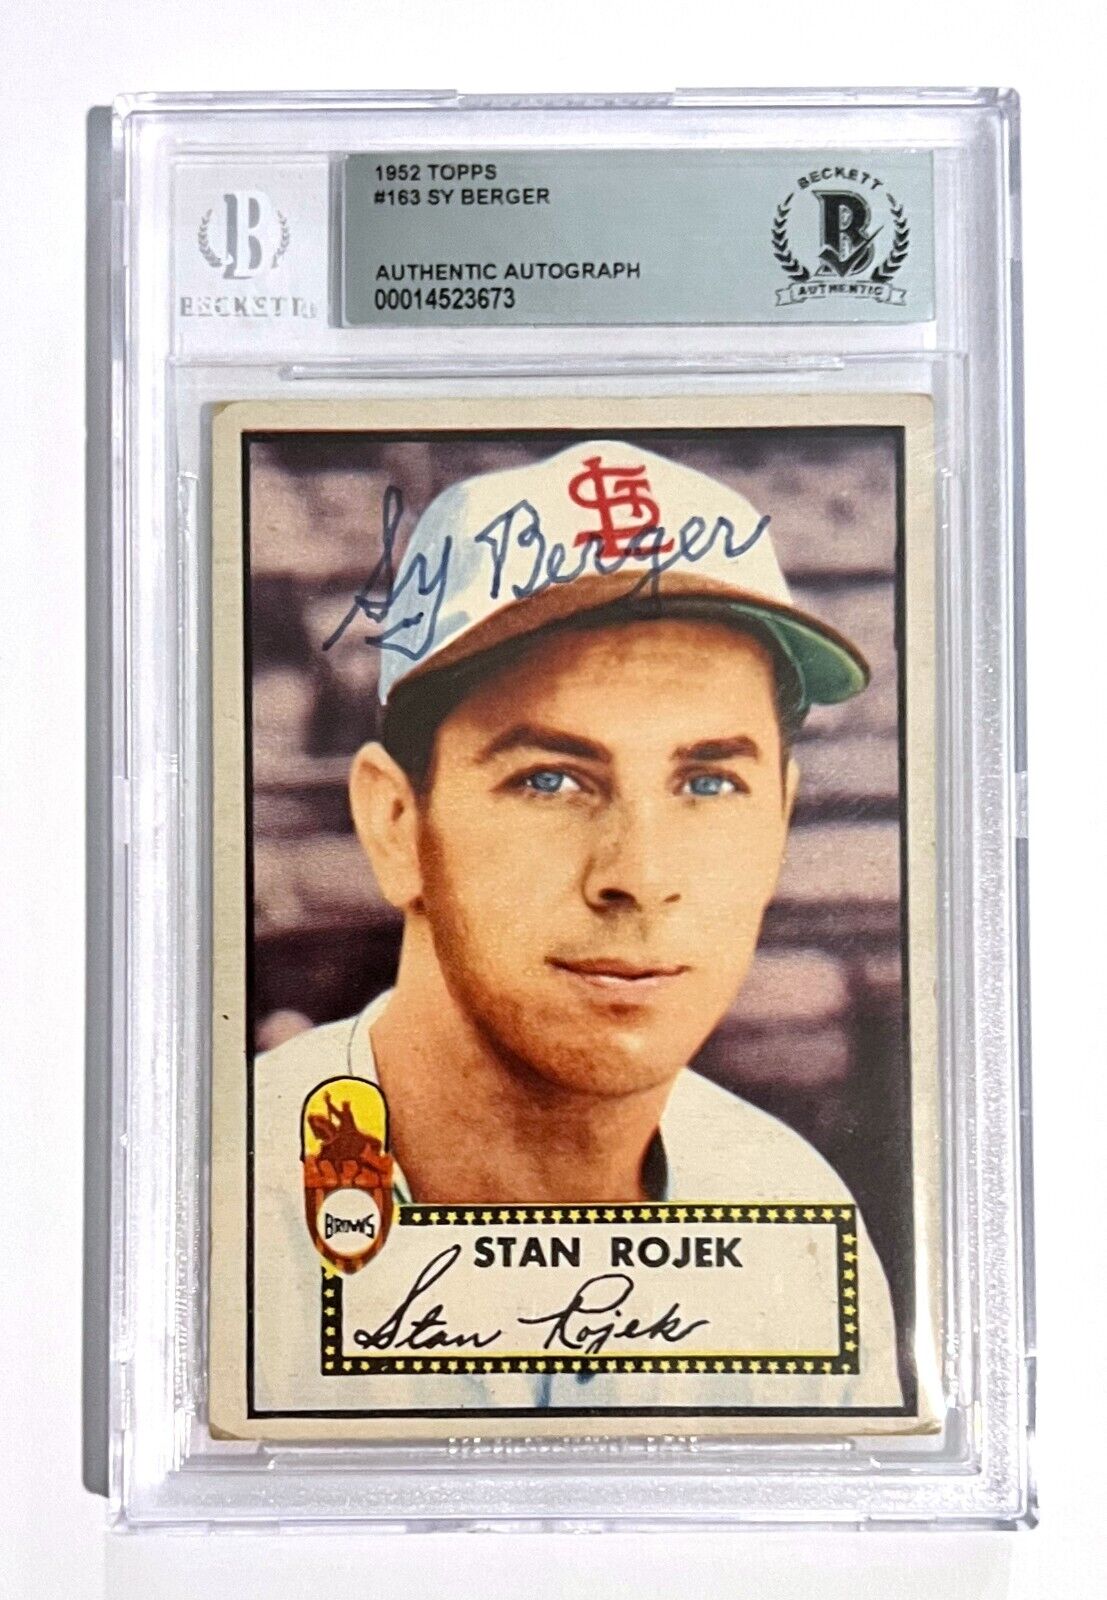 1952 Topps Stan Rojek #163 SIGNED by Sy Berger BAS AUTO Autograph RARE